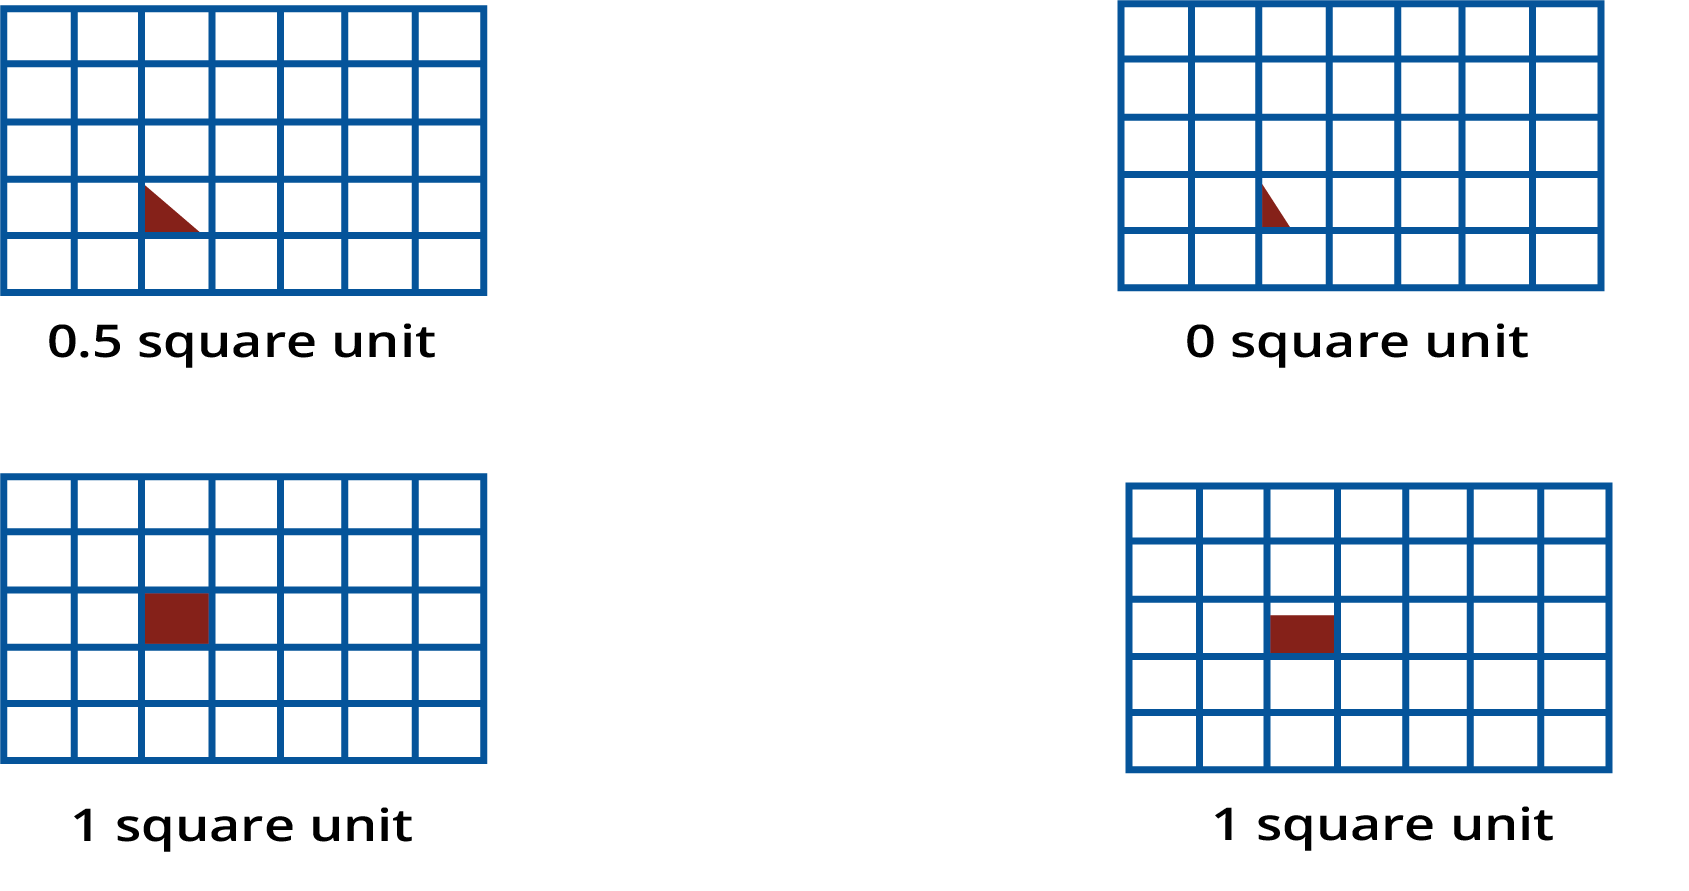 Area of the big rectangle